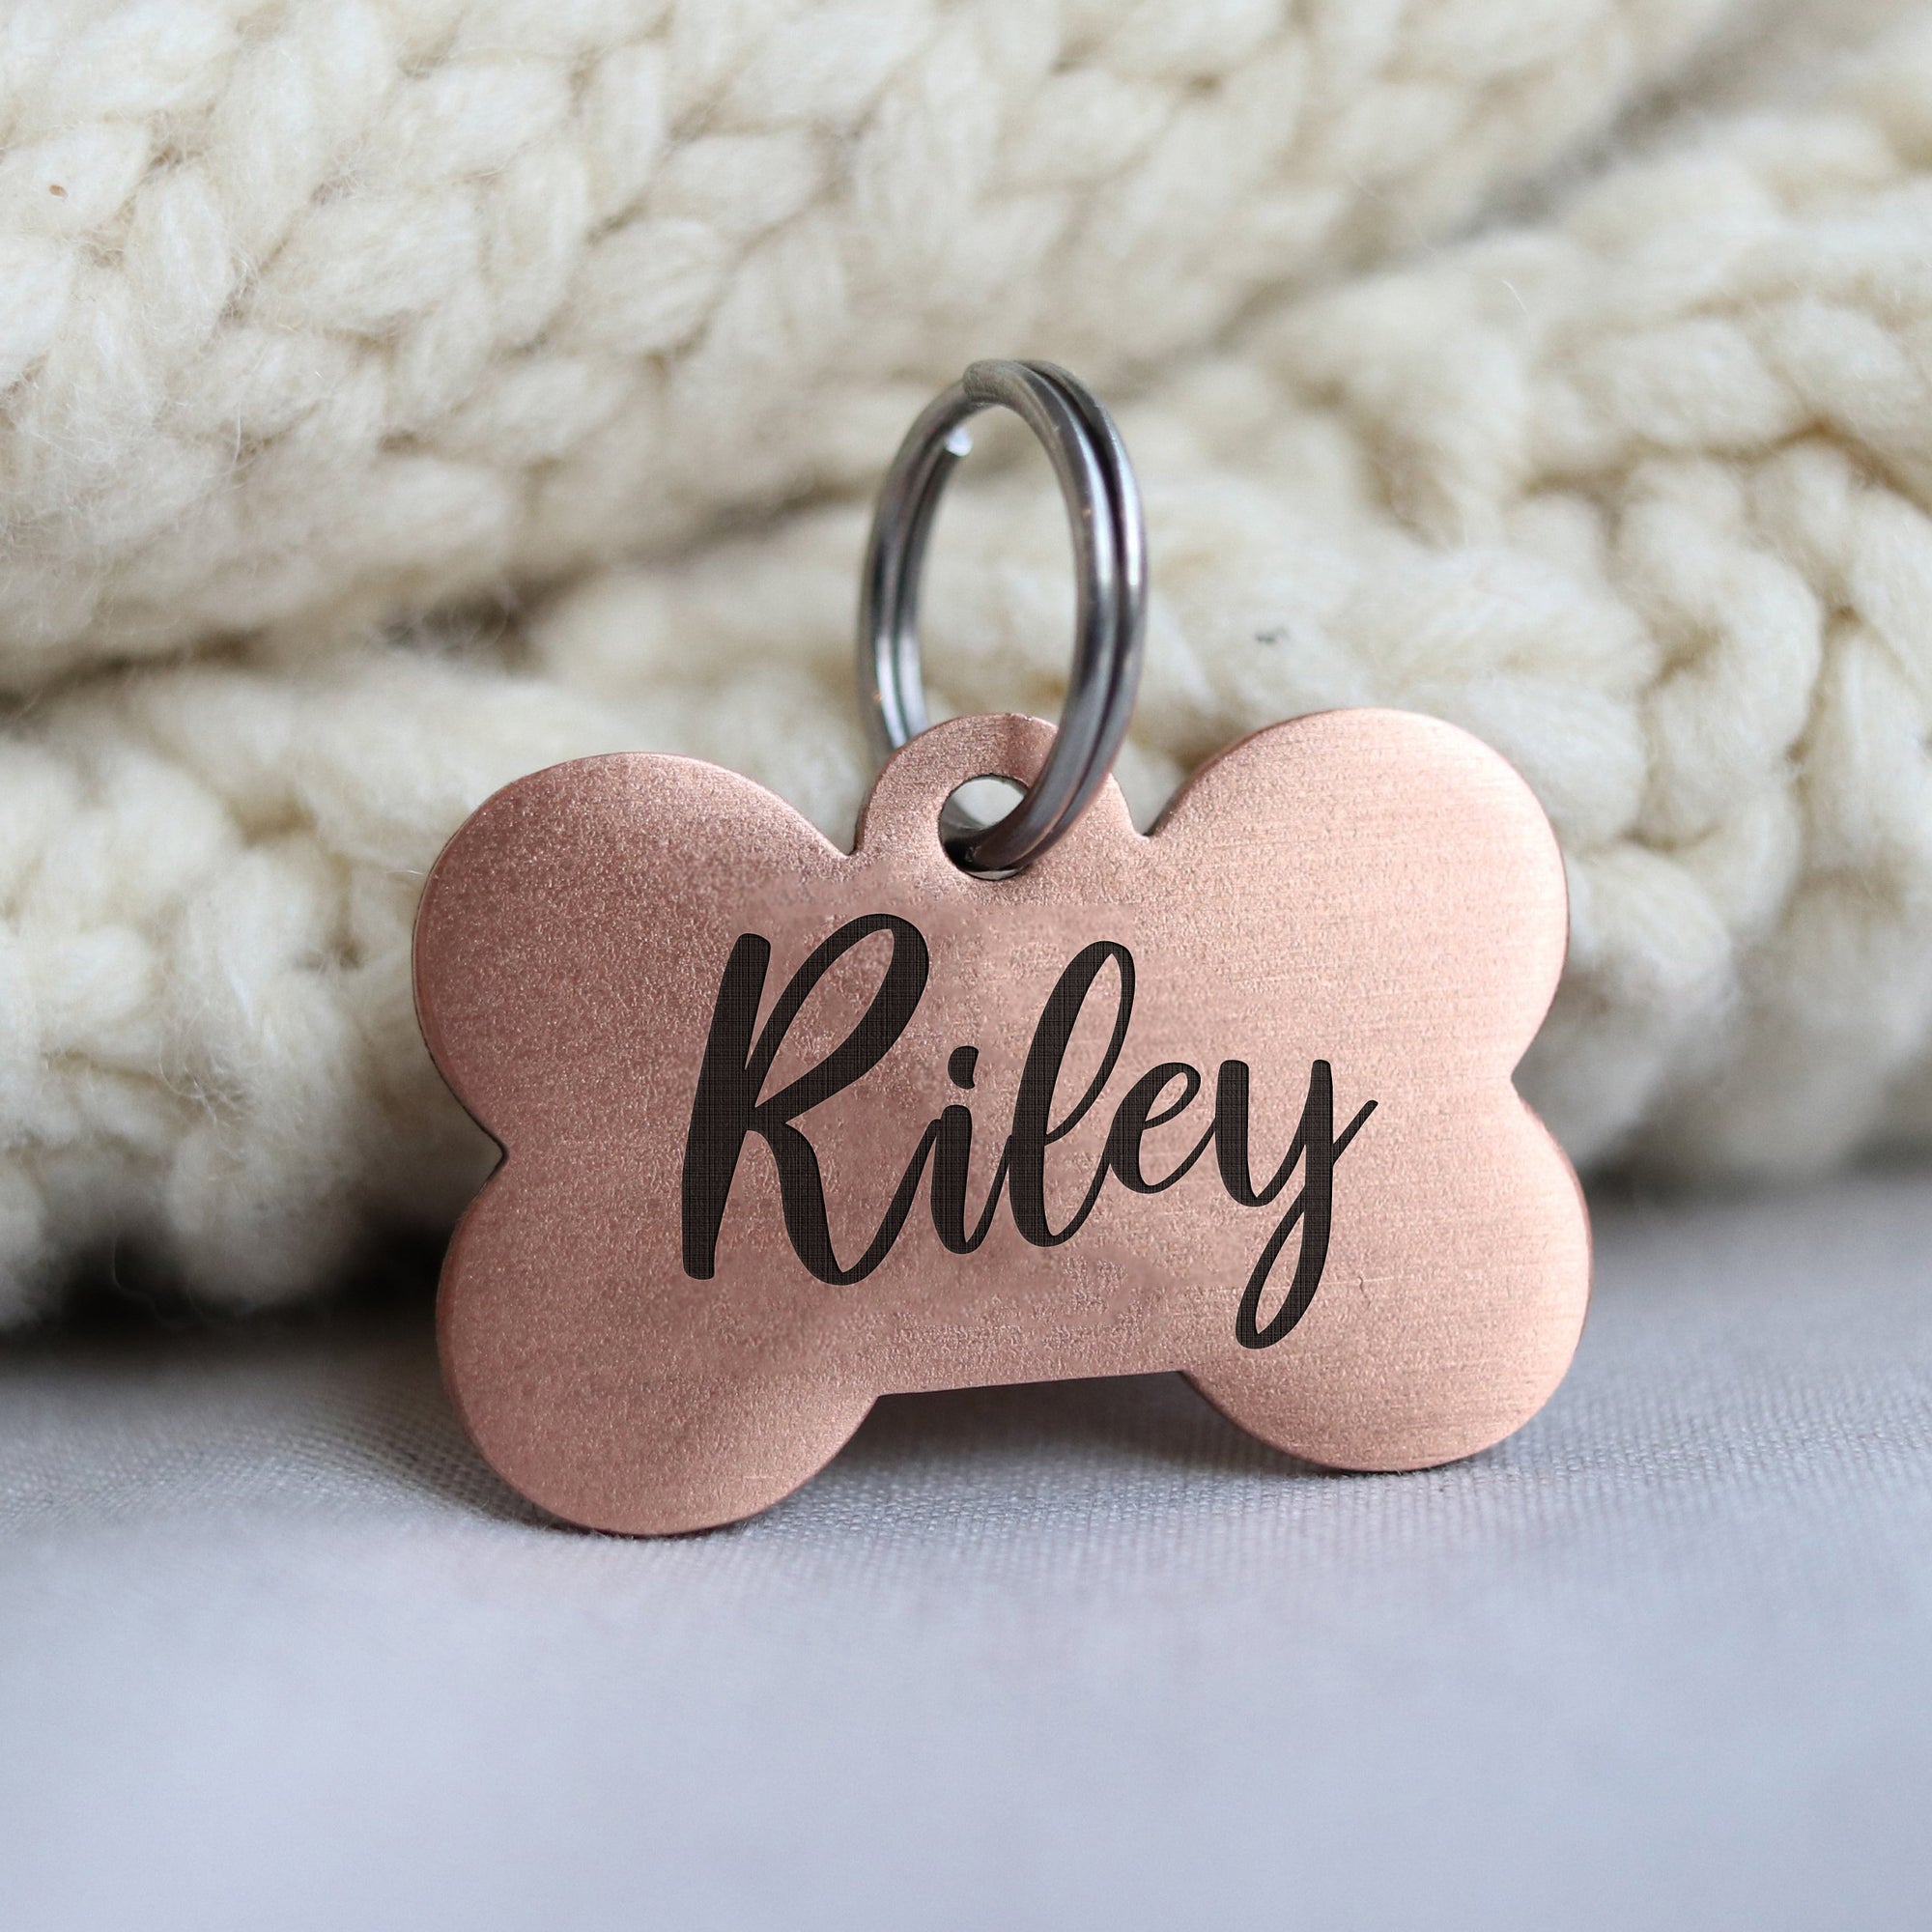 Engraved dog tag, personalized pet identification collar tag